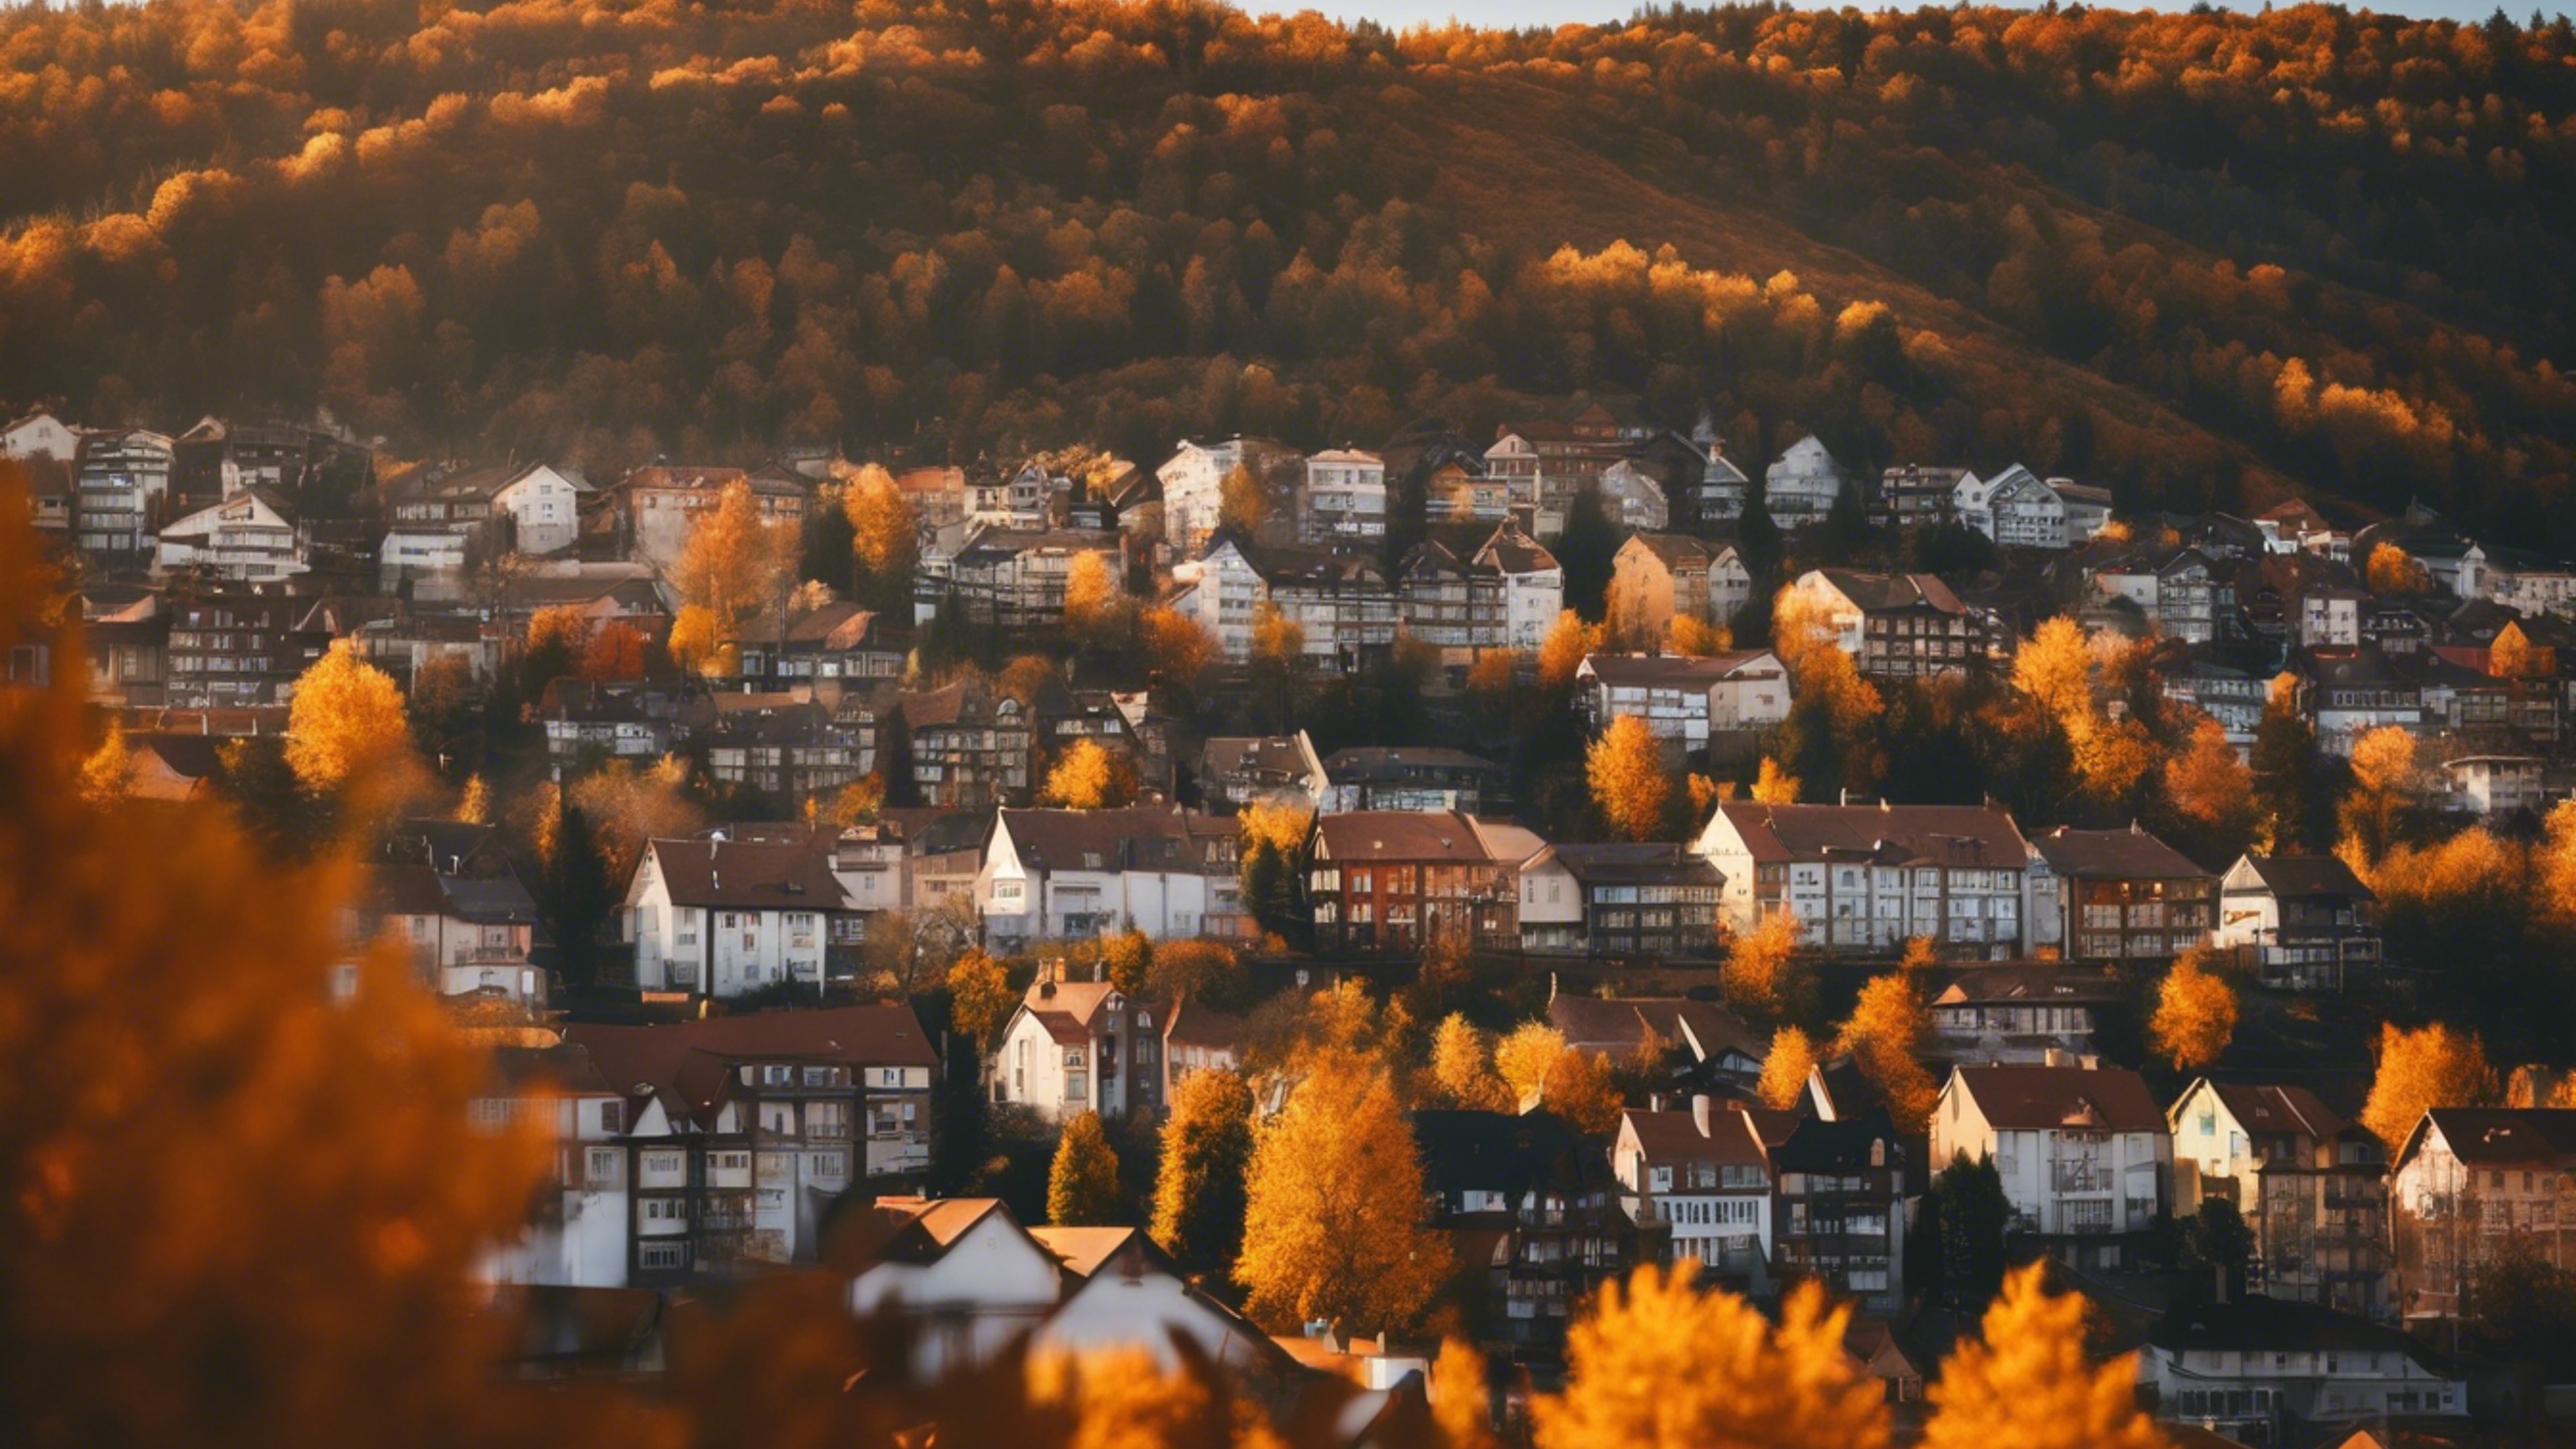 A calm skyline view of a mountain town in autumn, dappled in hues of orange and gold. Behang[cb2d4b5eada64efeb989]